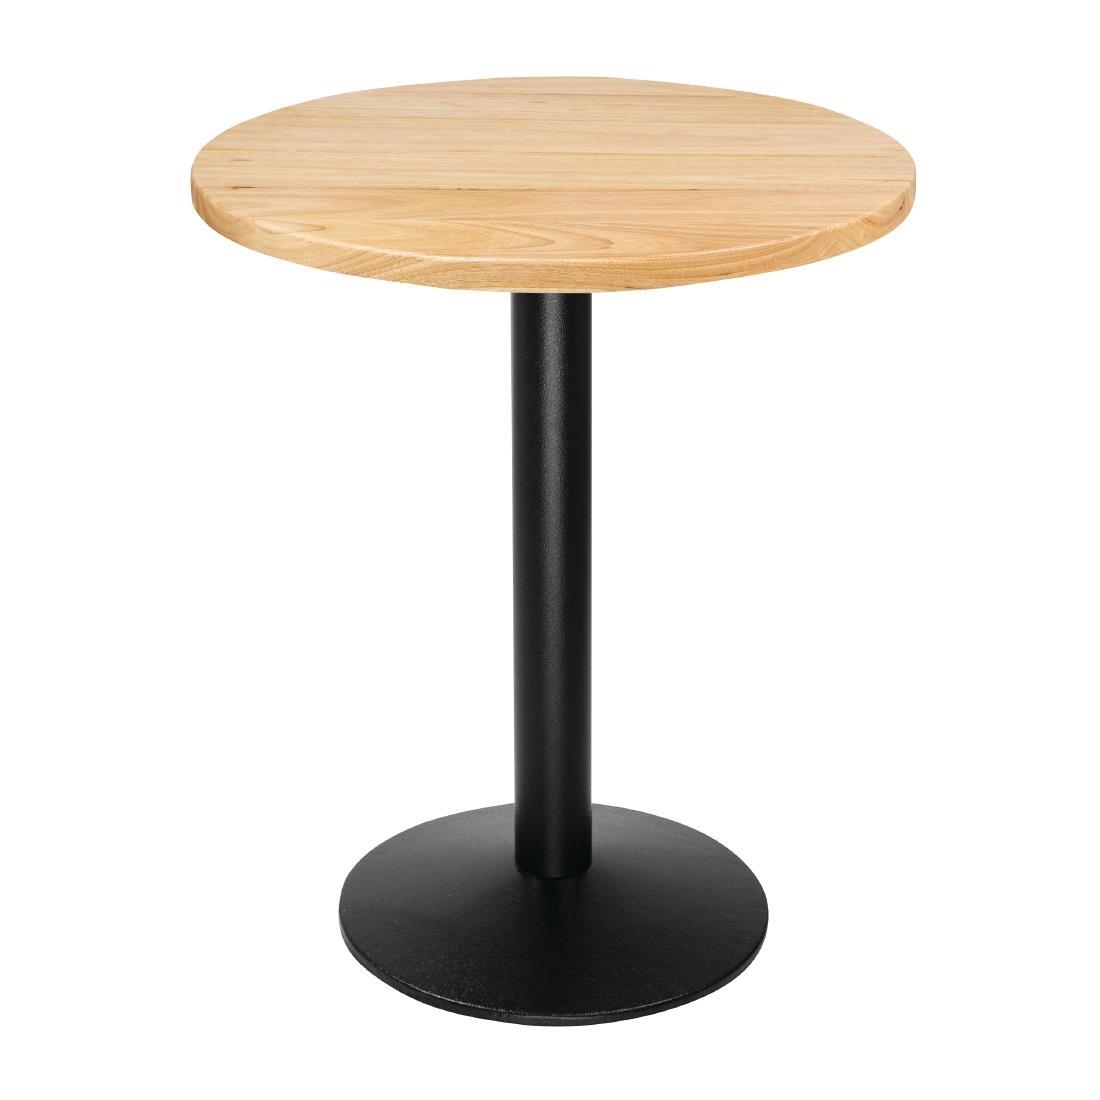 Bolero Pre-drilled Round Table Top Natural 600mm - DY738  - 5